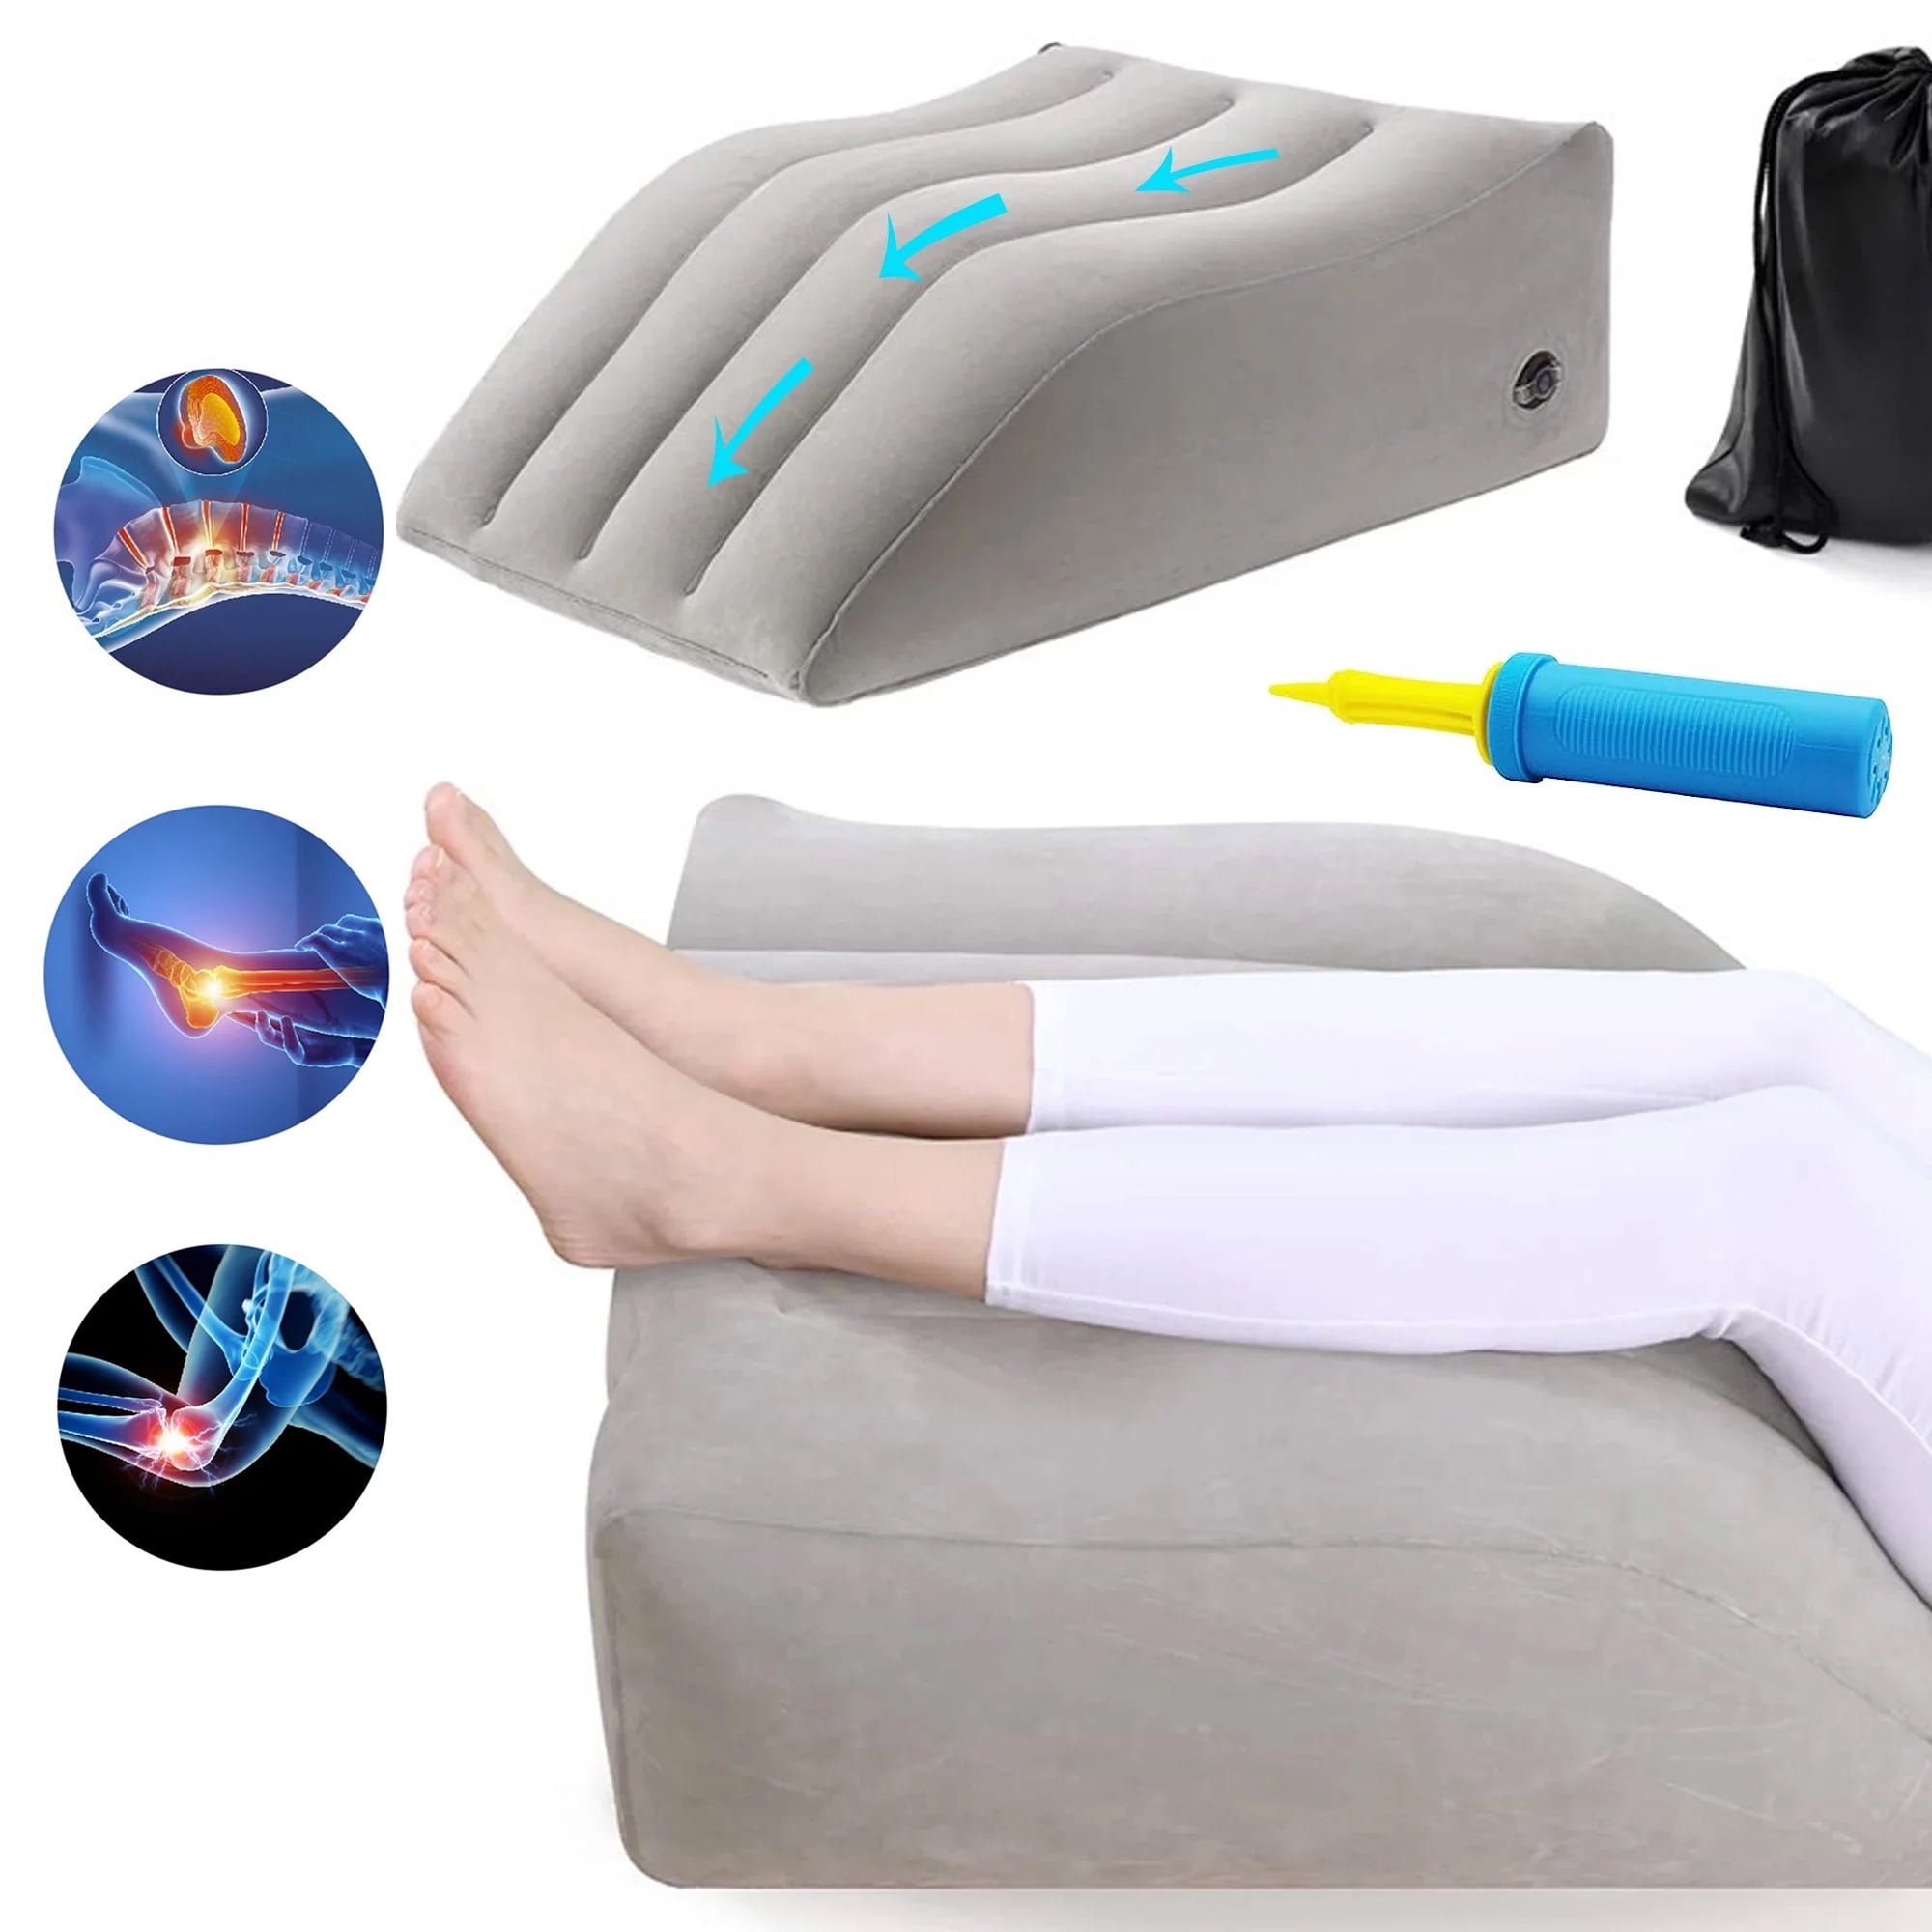 Leg Elevation Pillows, Inflatable Wedge Pillows for Sleeping